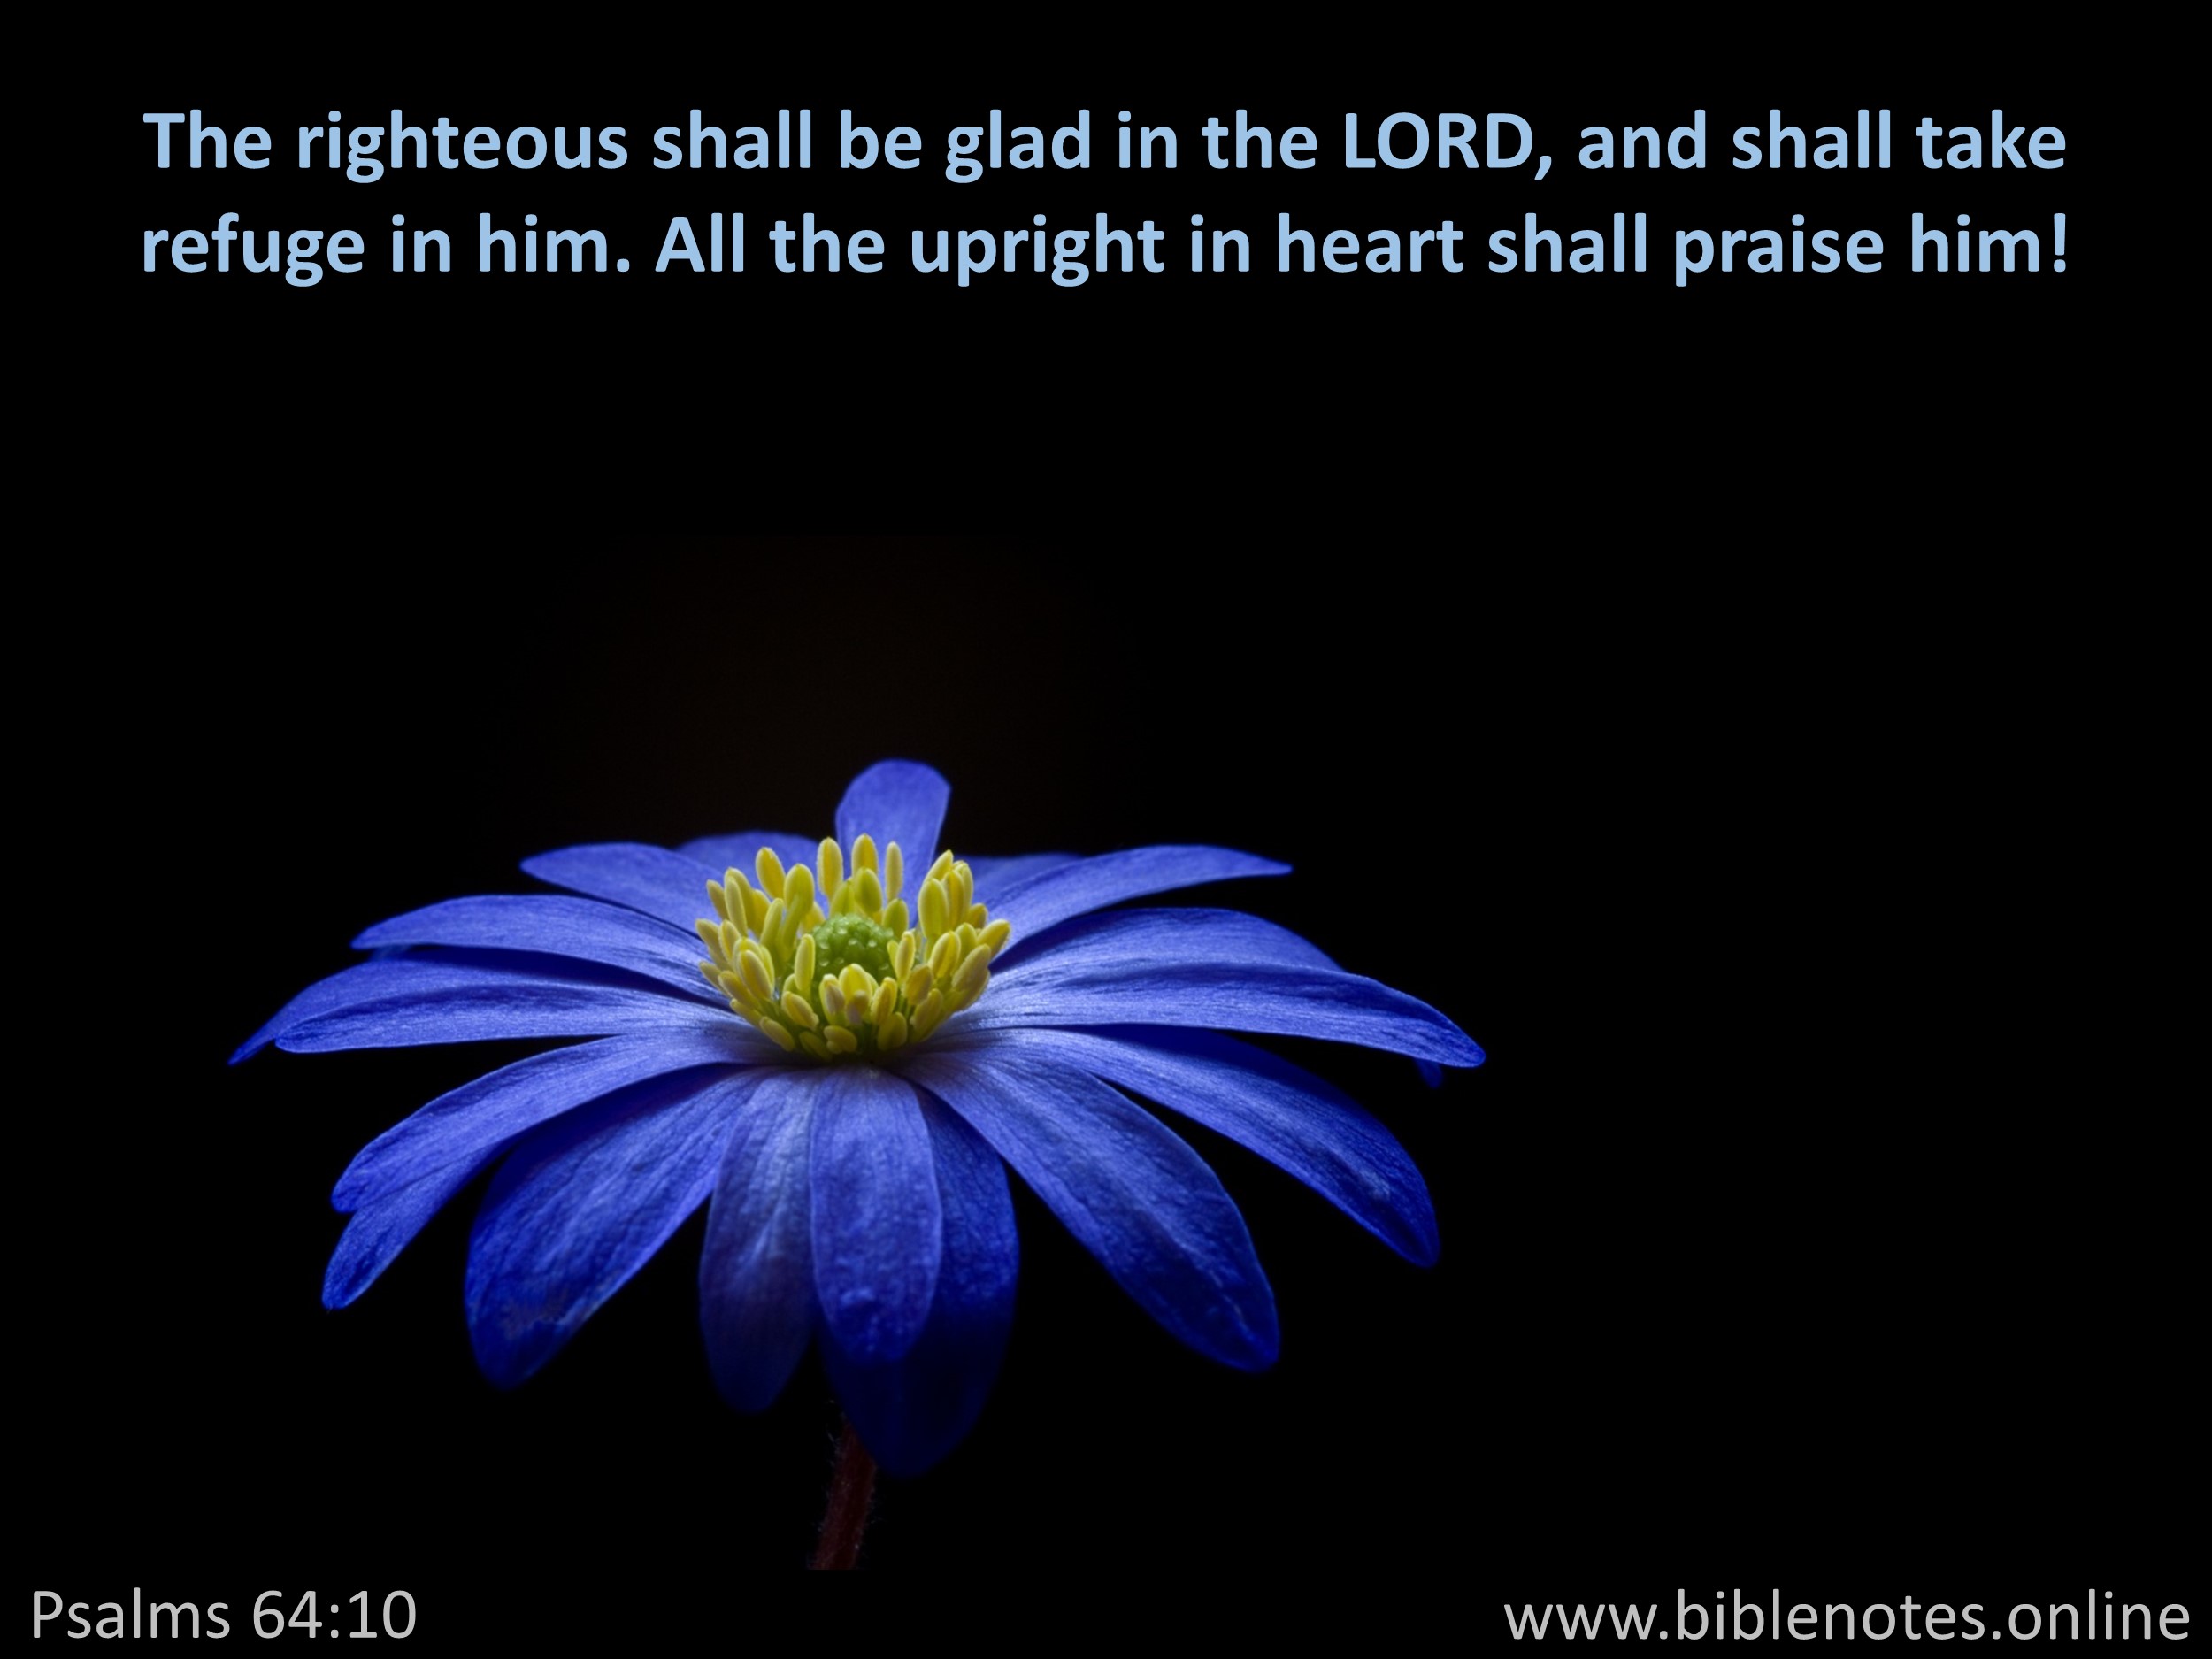 Bible Verse from Psalms Chapter 64